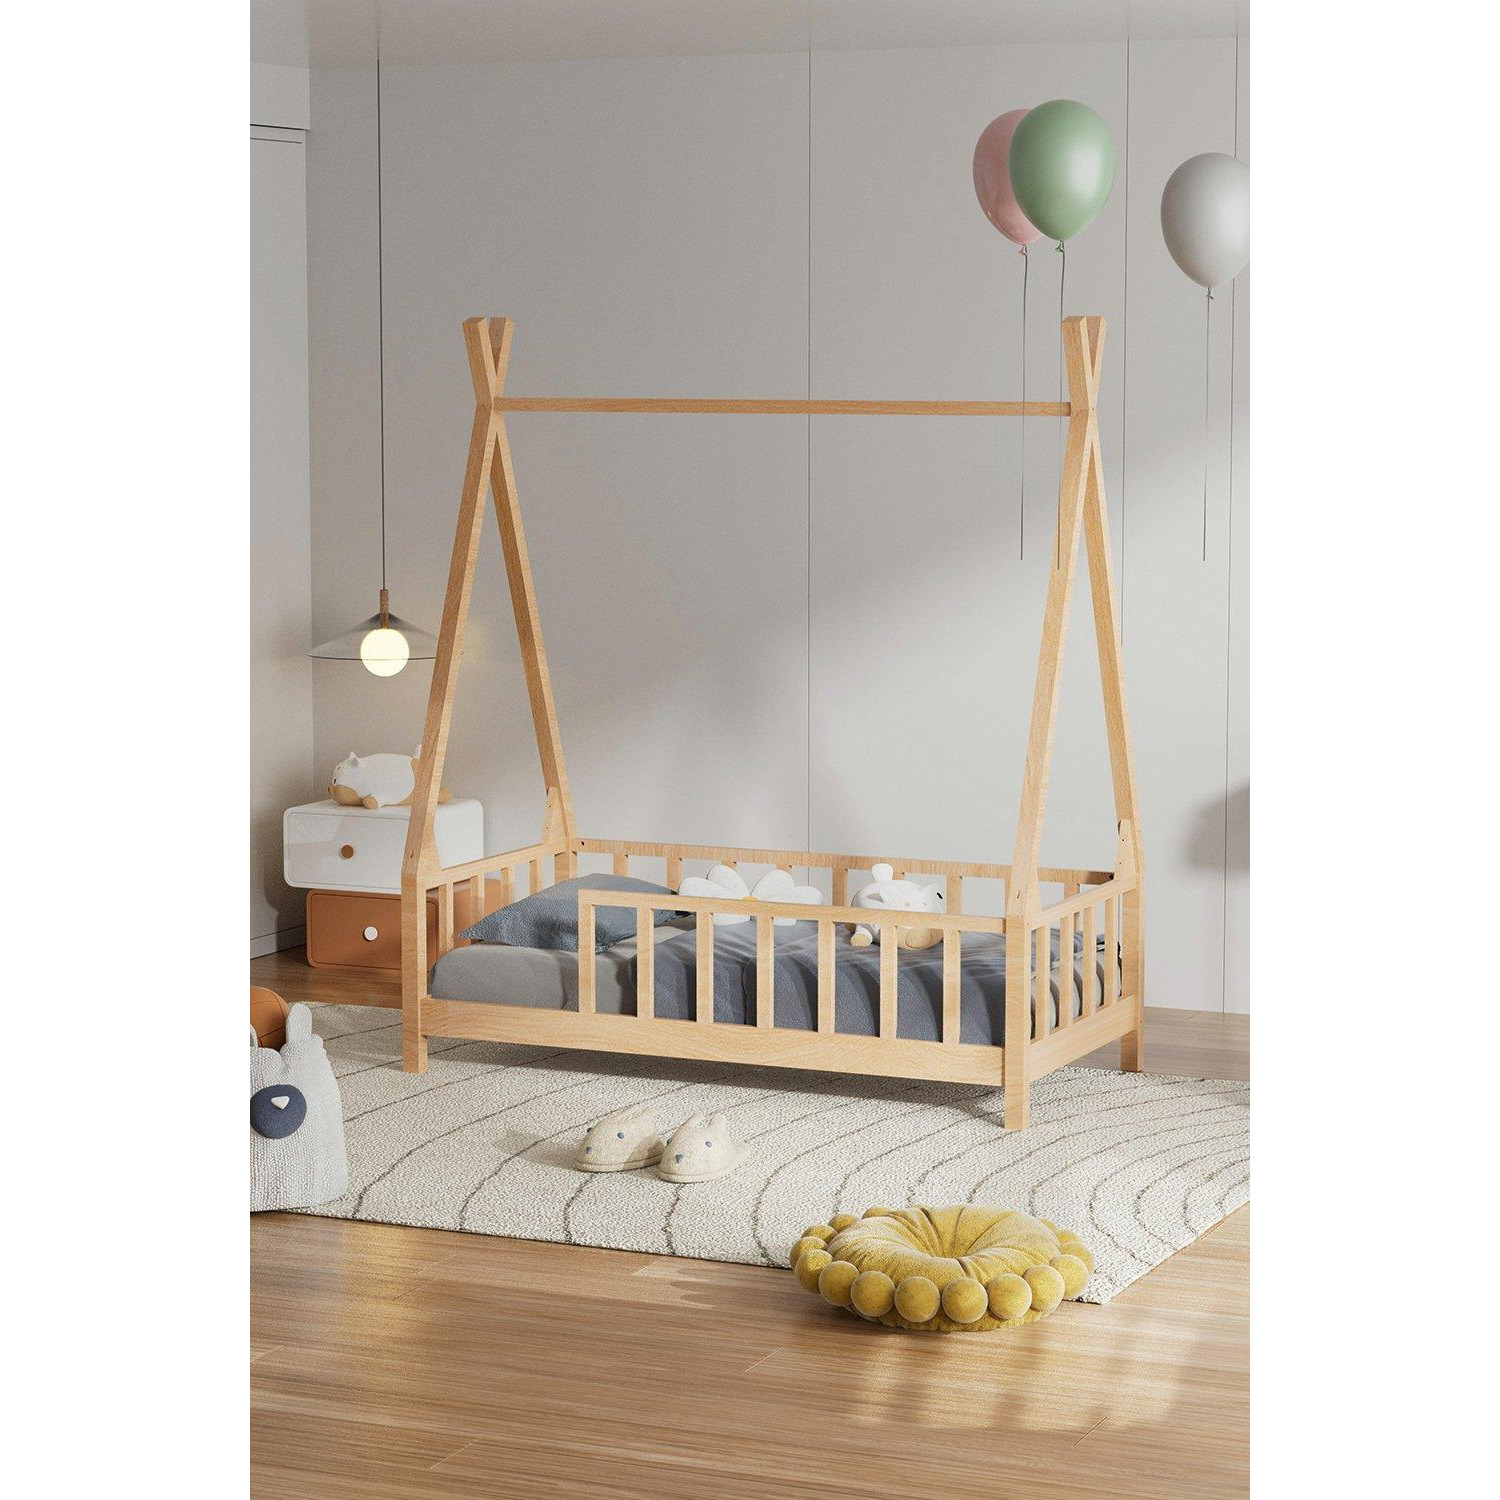 Natural Color Kid's Premium Wood House Bed Frame with Fence - image 1